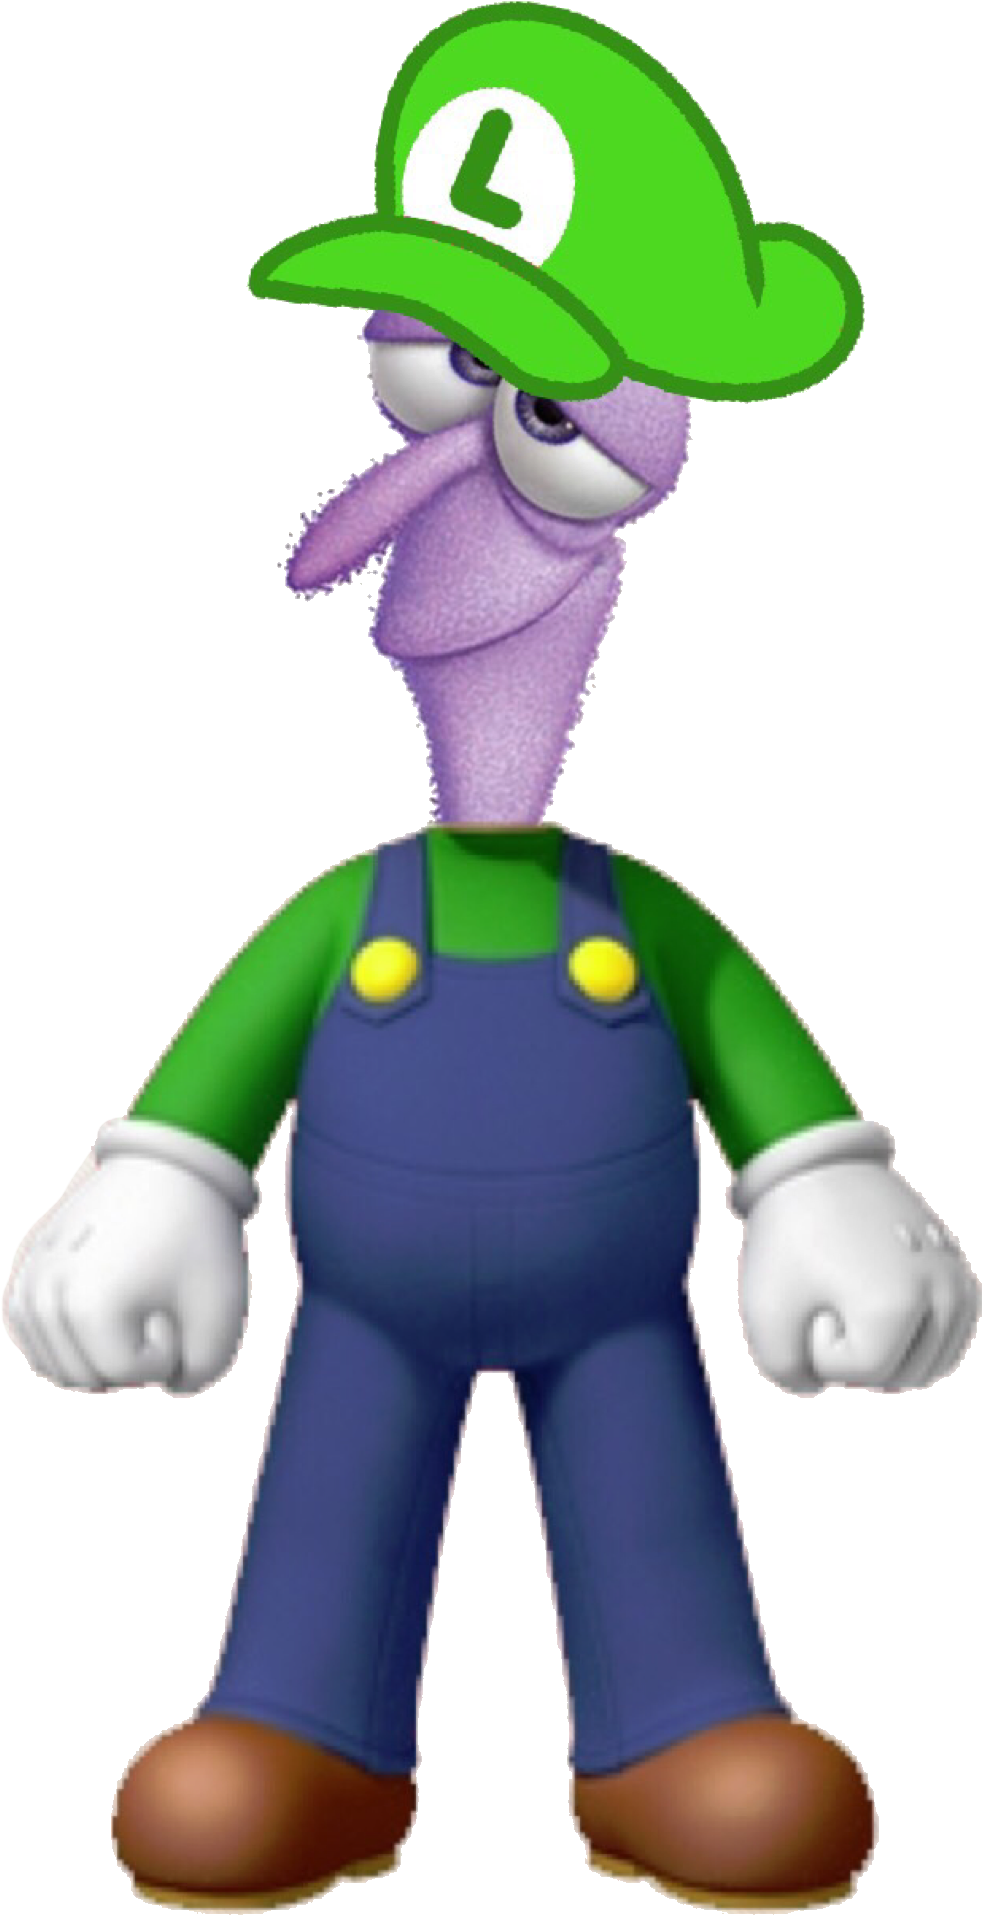 Luigi Fearful Expression Cartoon Character PNG